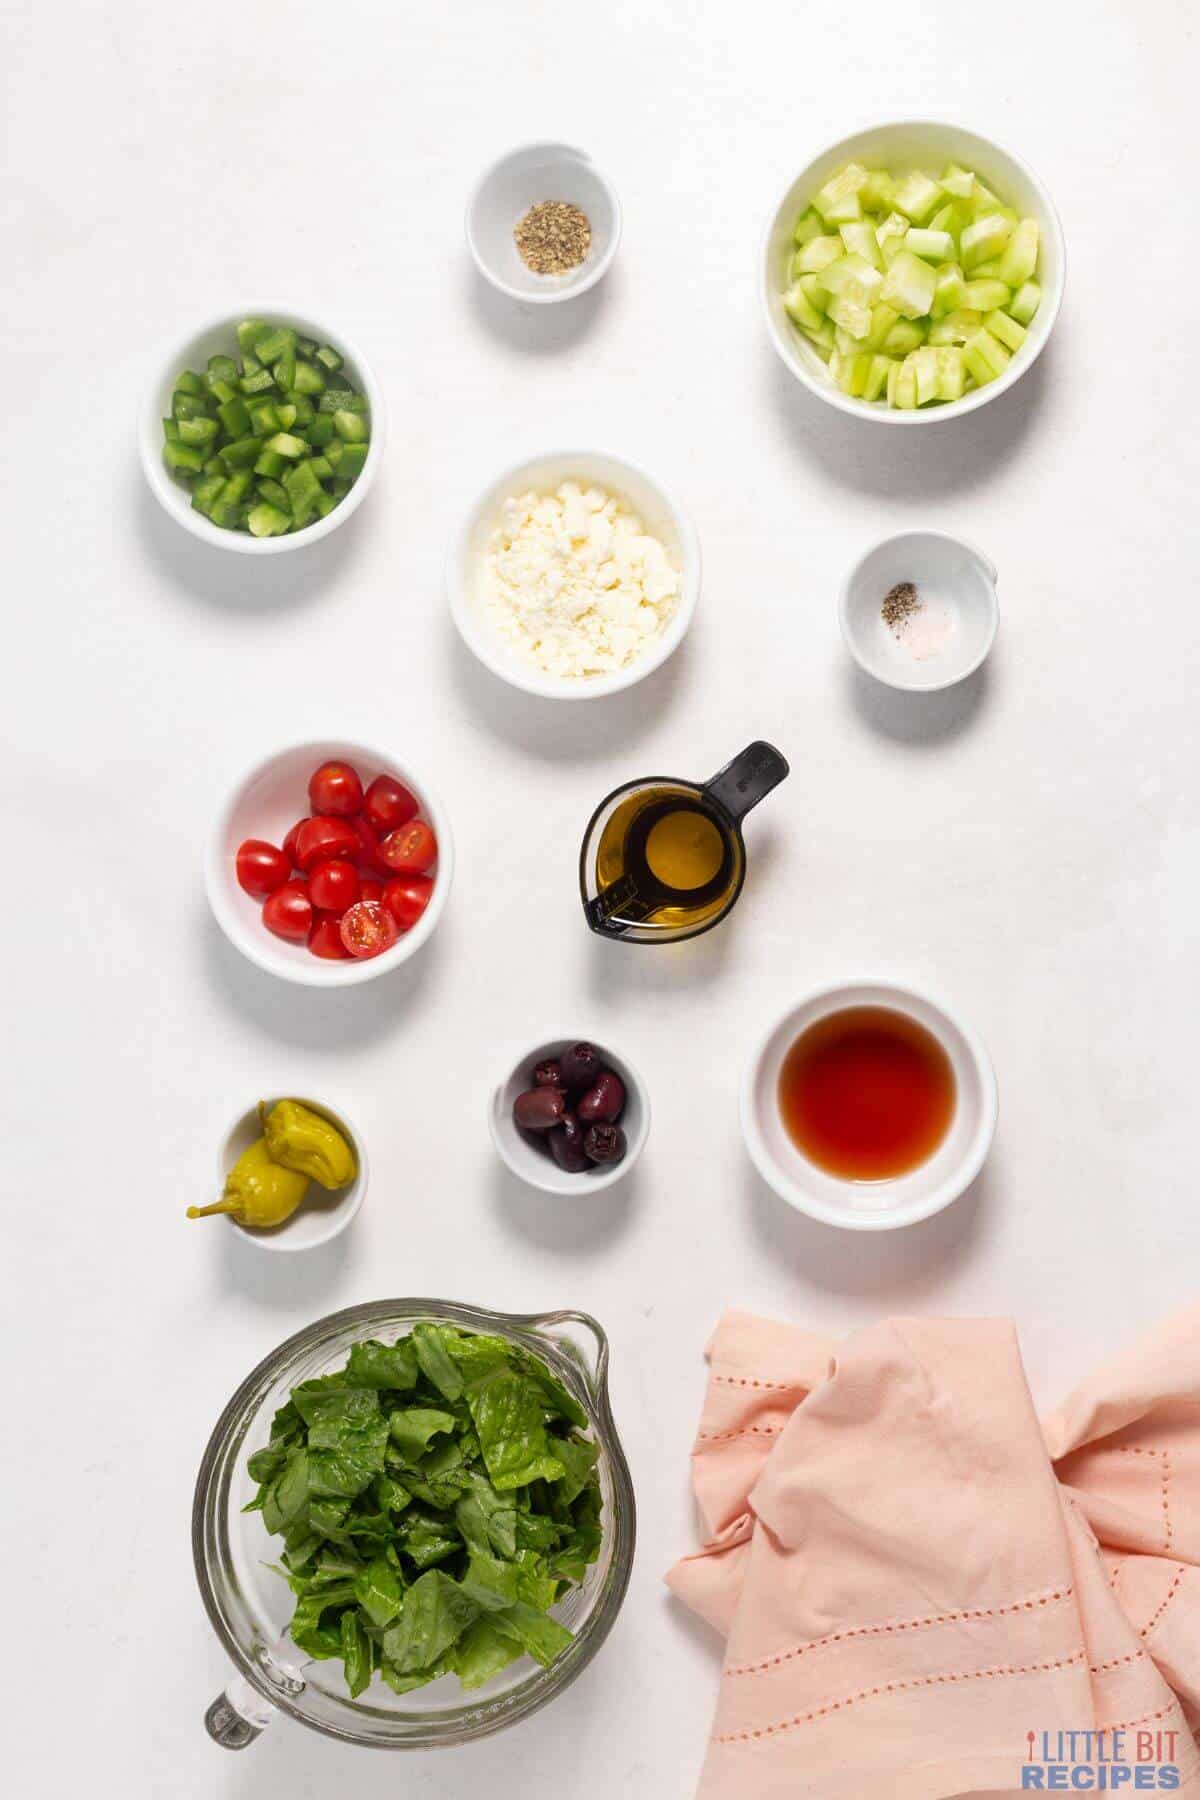 ingredients for the greek salad recipe.